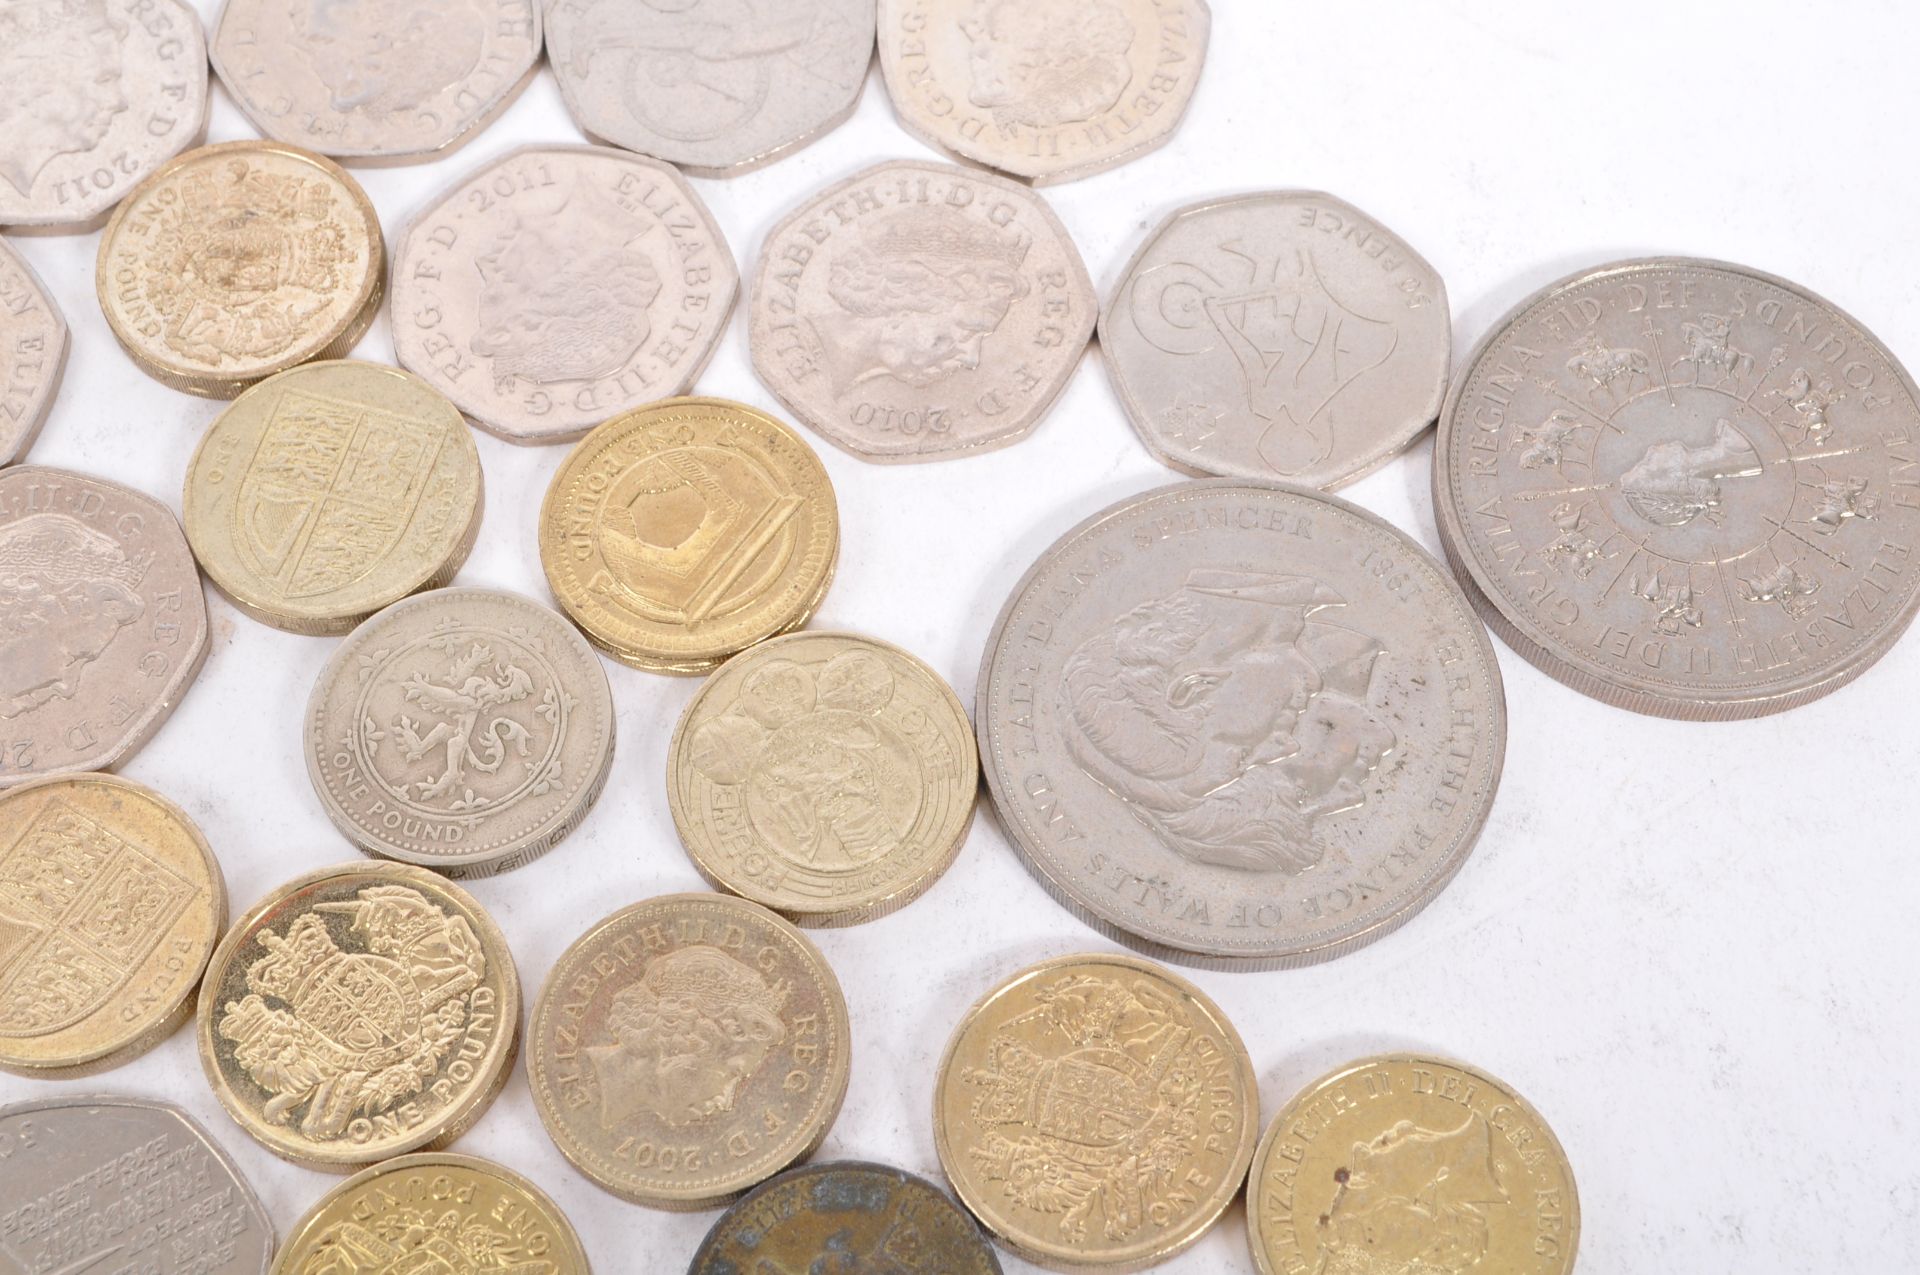 COLLETION OF UNITED KINGDOM CIRCULATED CURRENCY COINAGE - Image 7 of 9